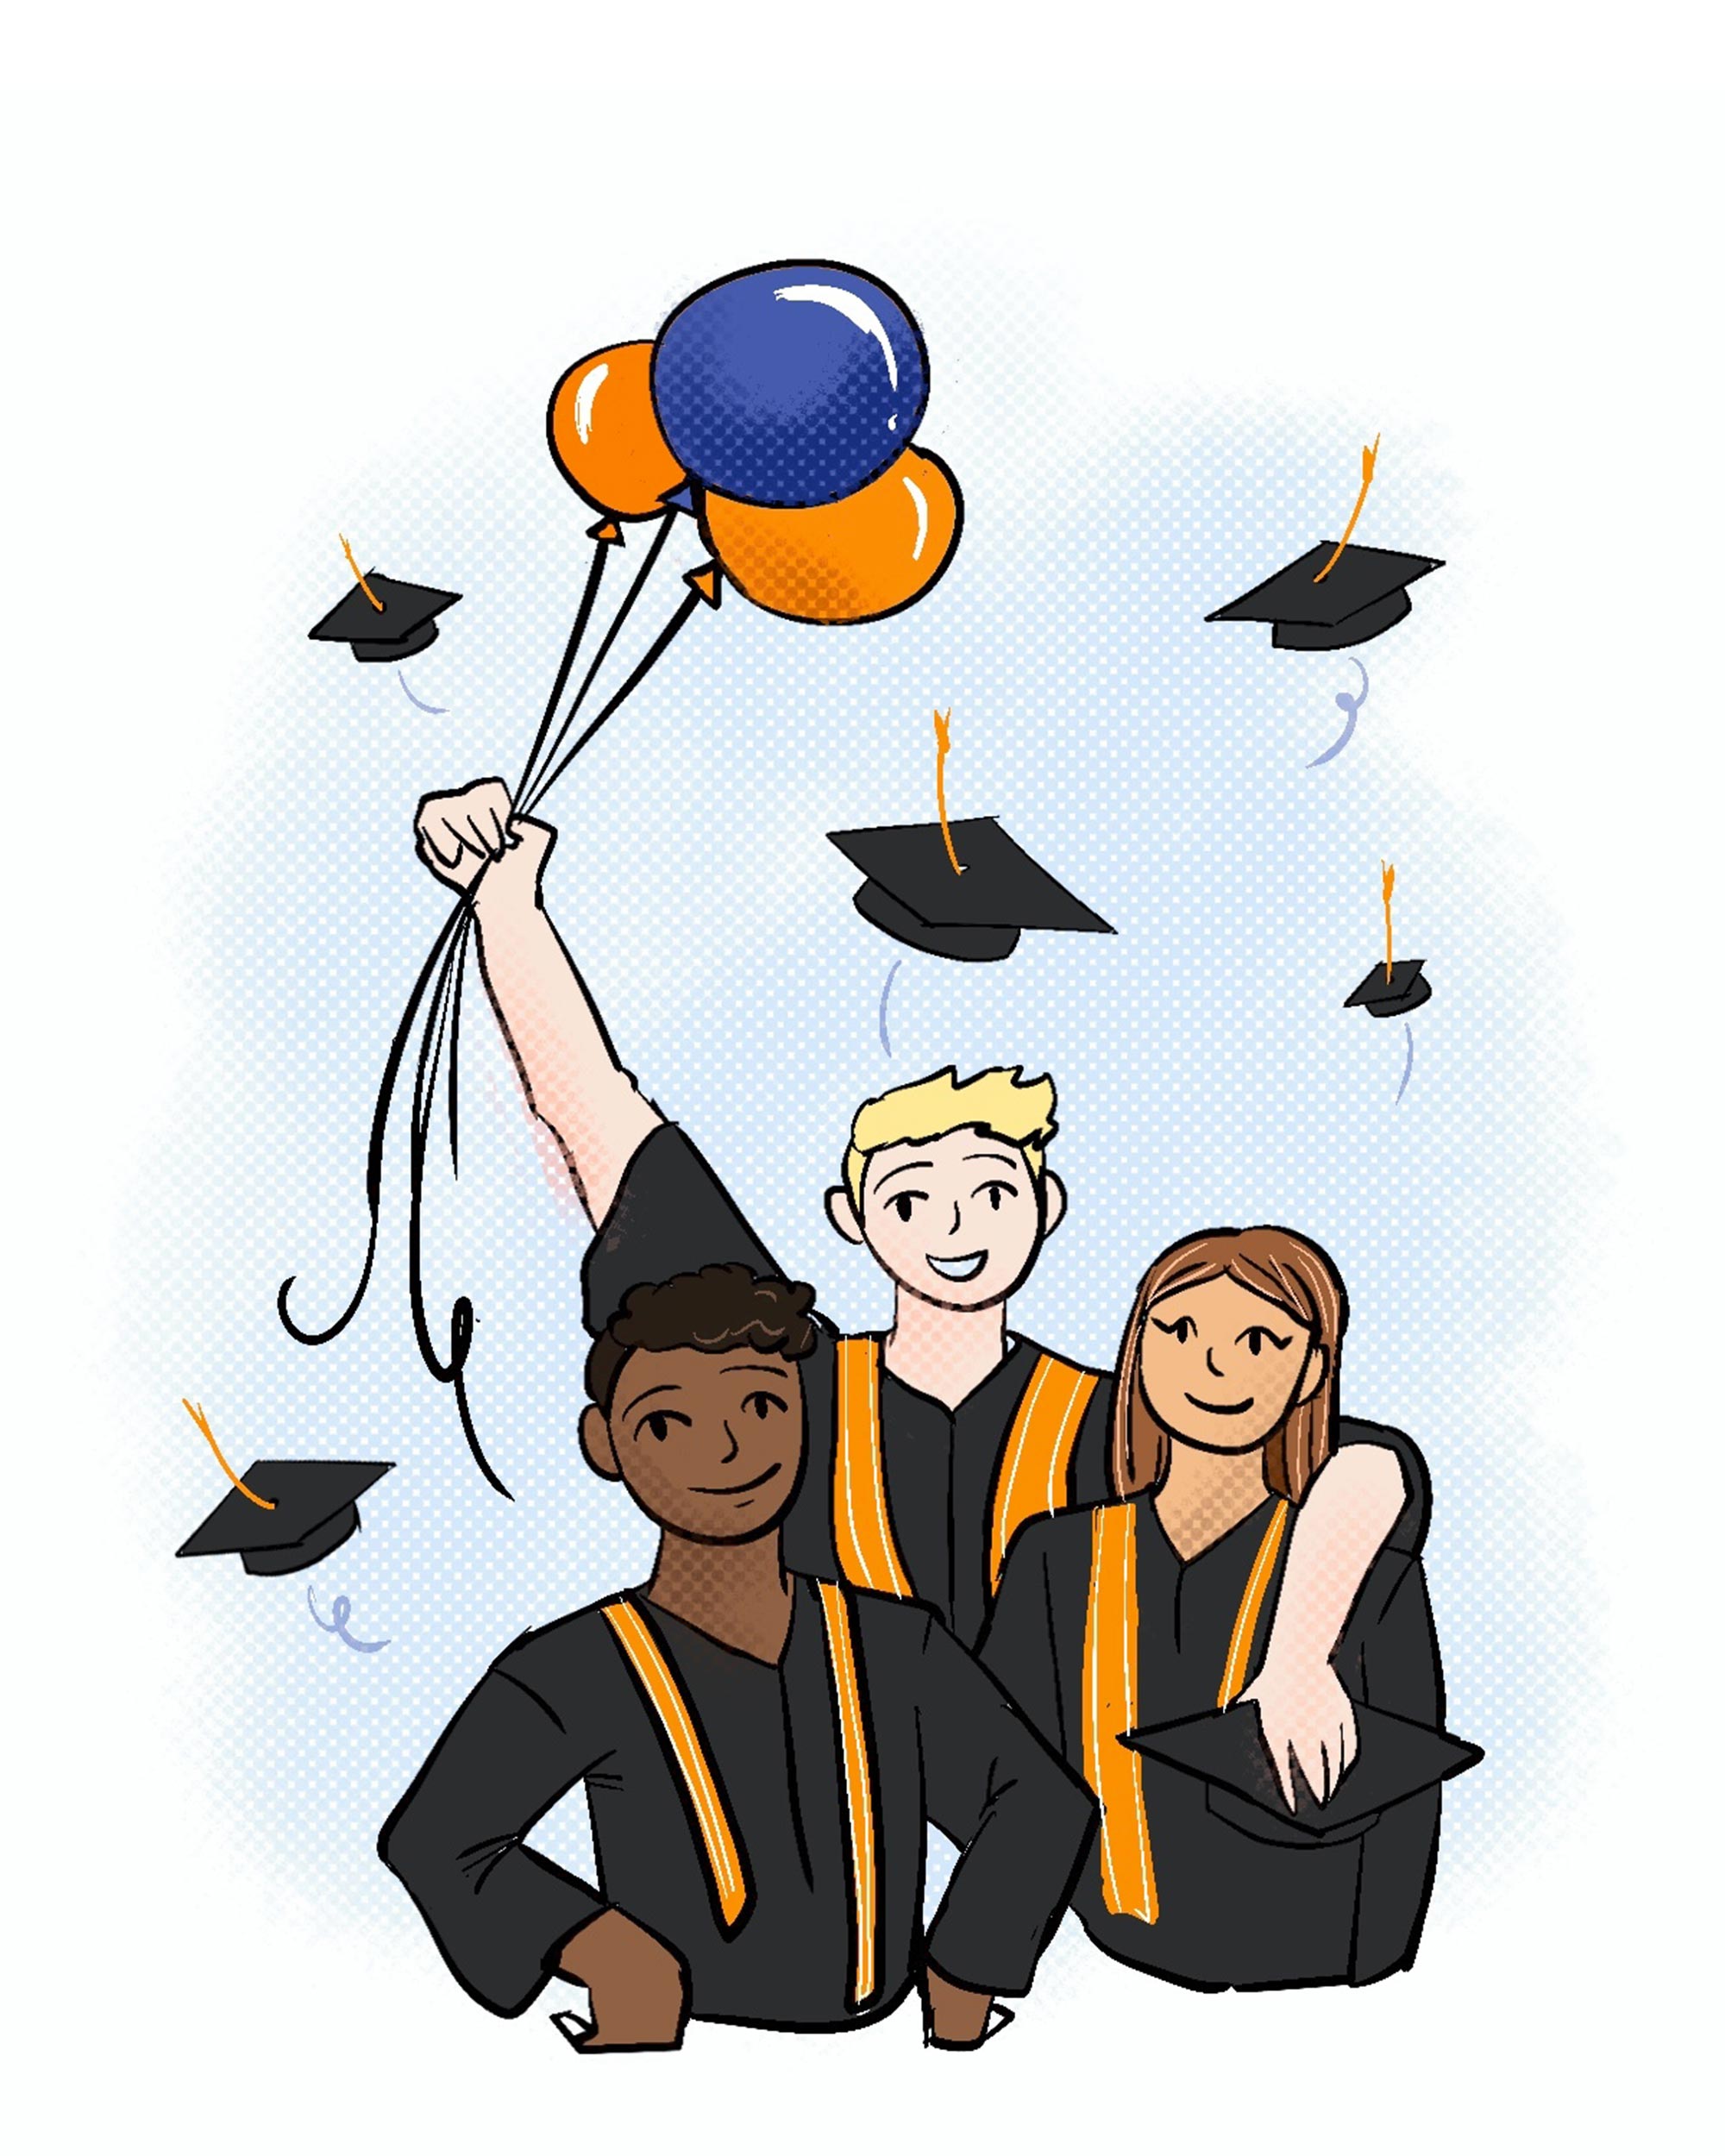 Illustration of three graduates celebrating together with balloons in hand and caps in the air